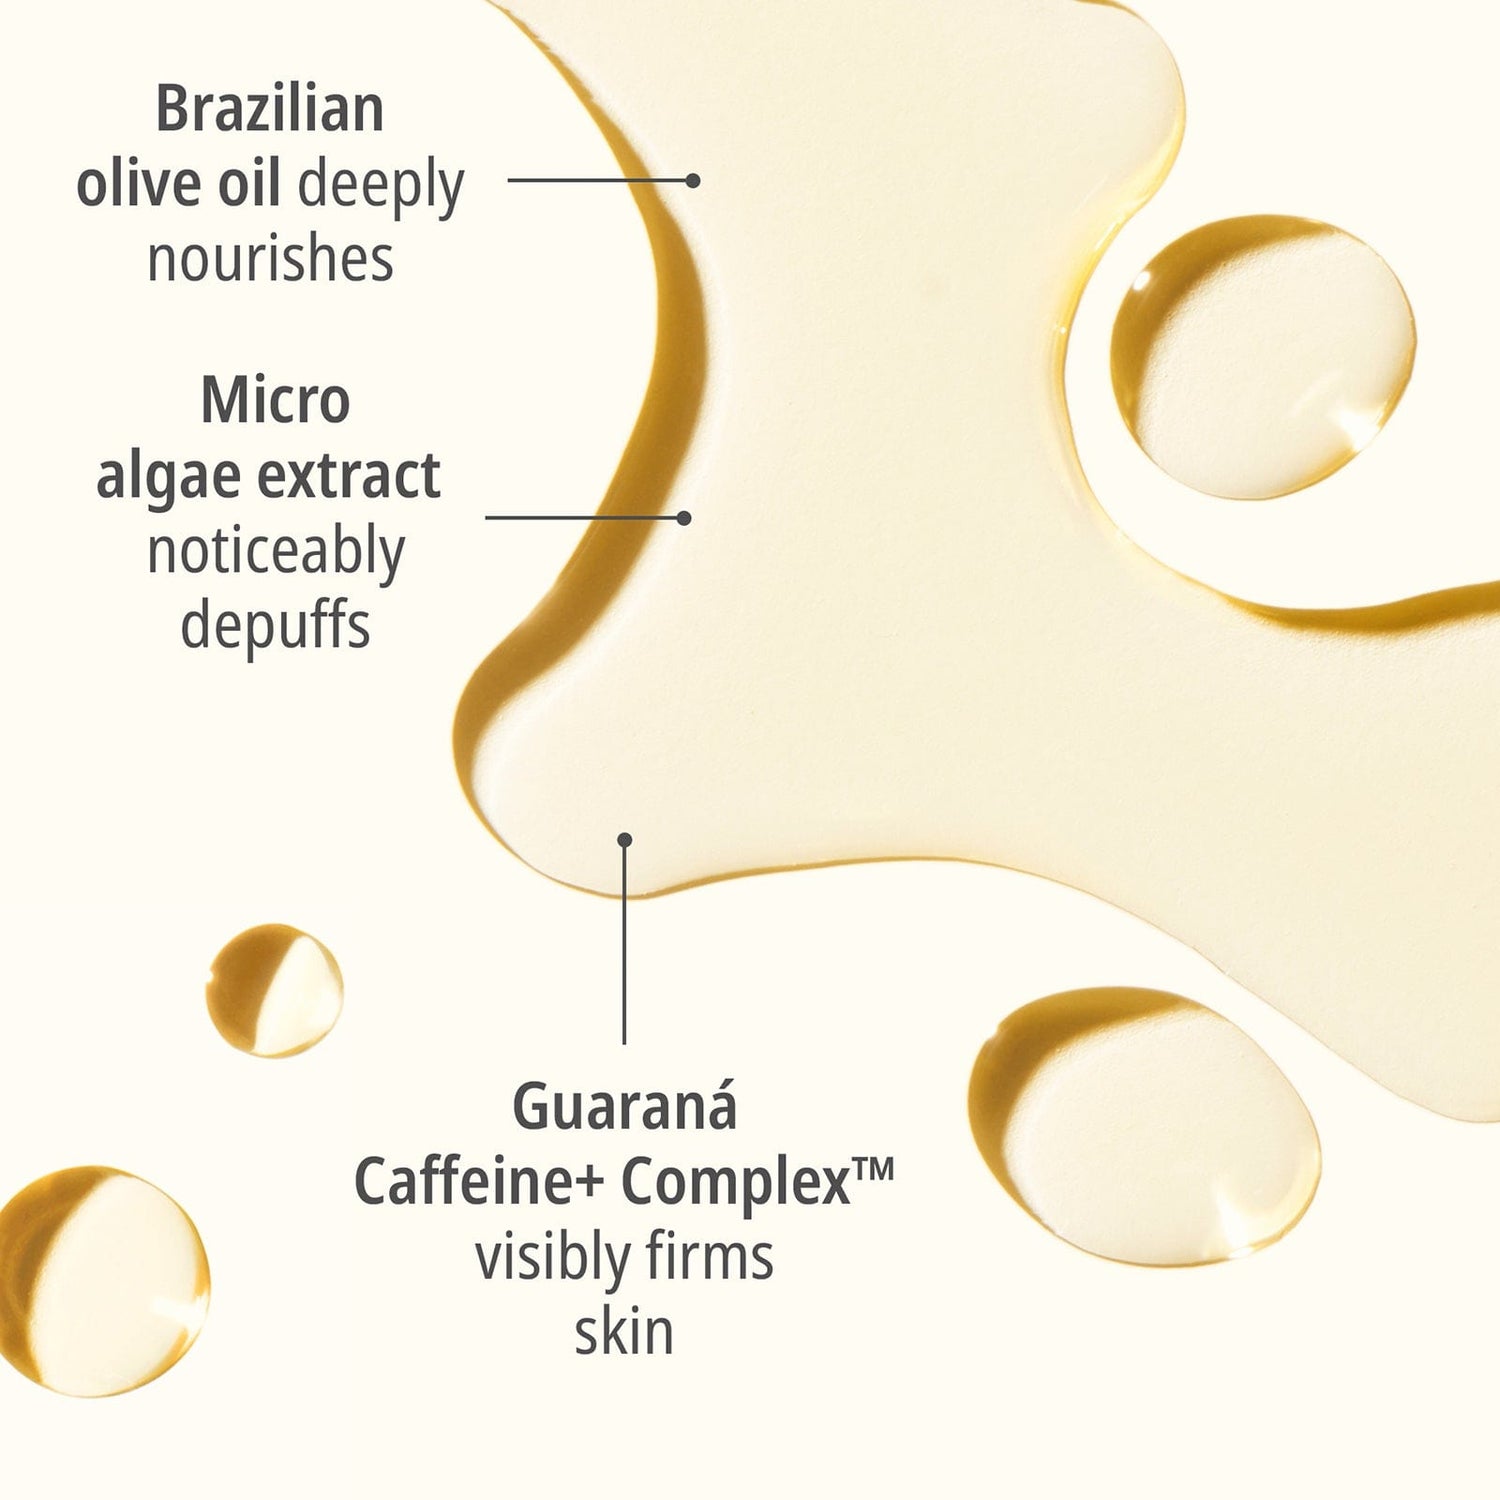 Brazilian olive oil deeply nourishes - micro algea extract noticeably depuffs - Guaraná Caffeine+ Complex™ visibly firms skin